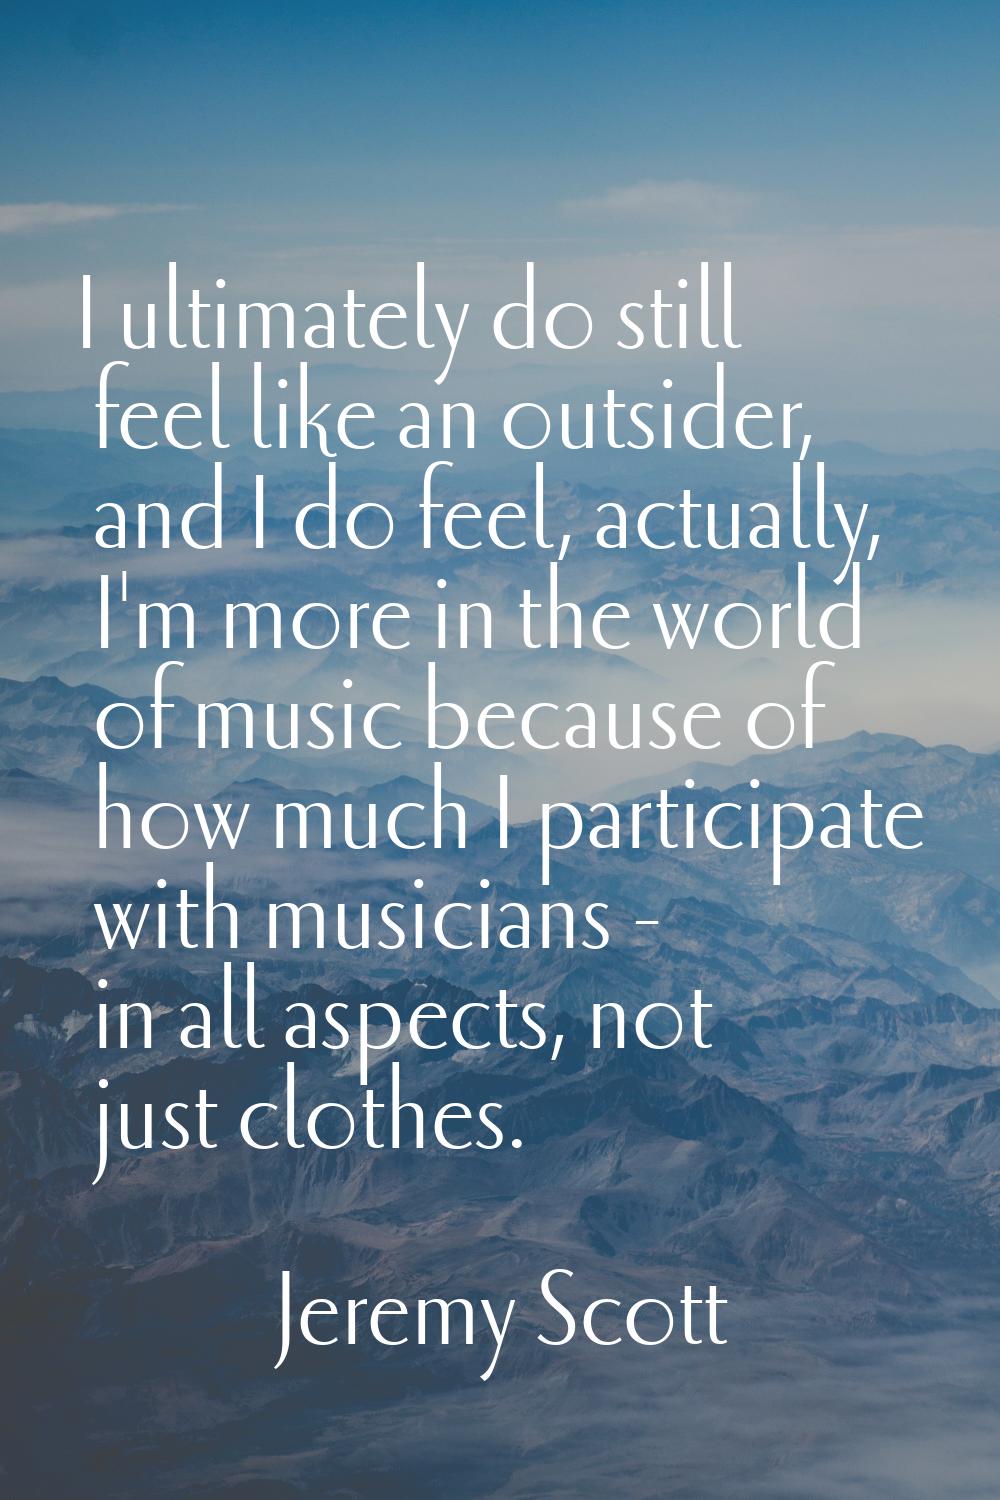 I ultimately do still feel like an outsider, and I do feel, actually, I'm more in the world of musi